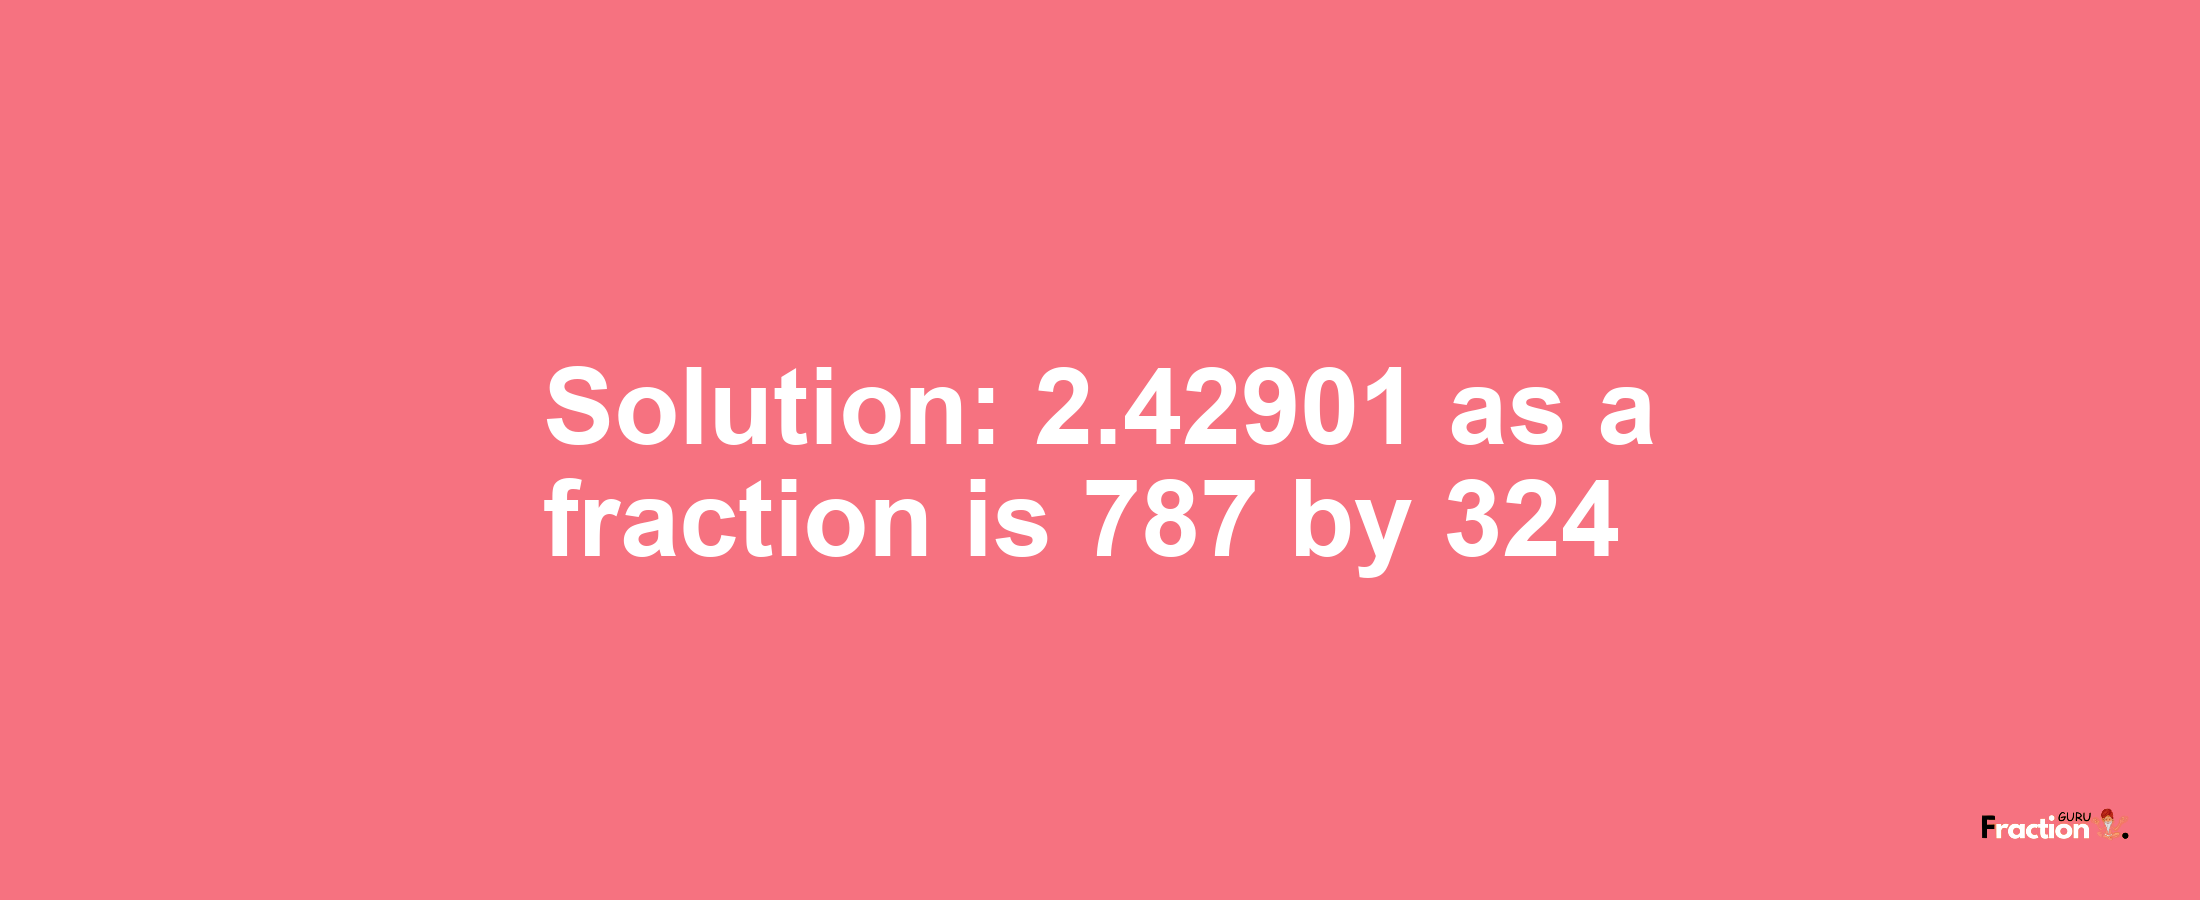 Solution:2.42901 as a fraction is 787/324